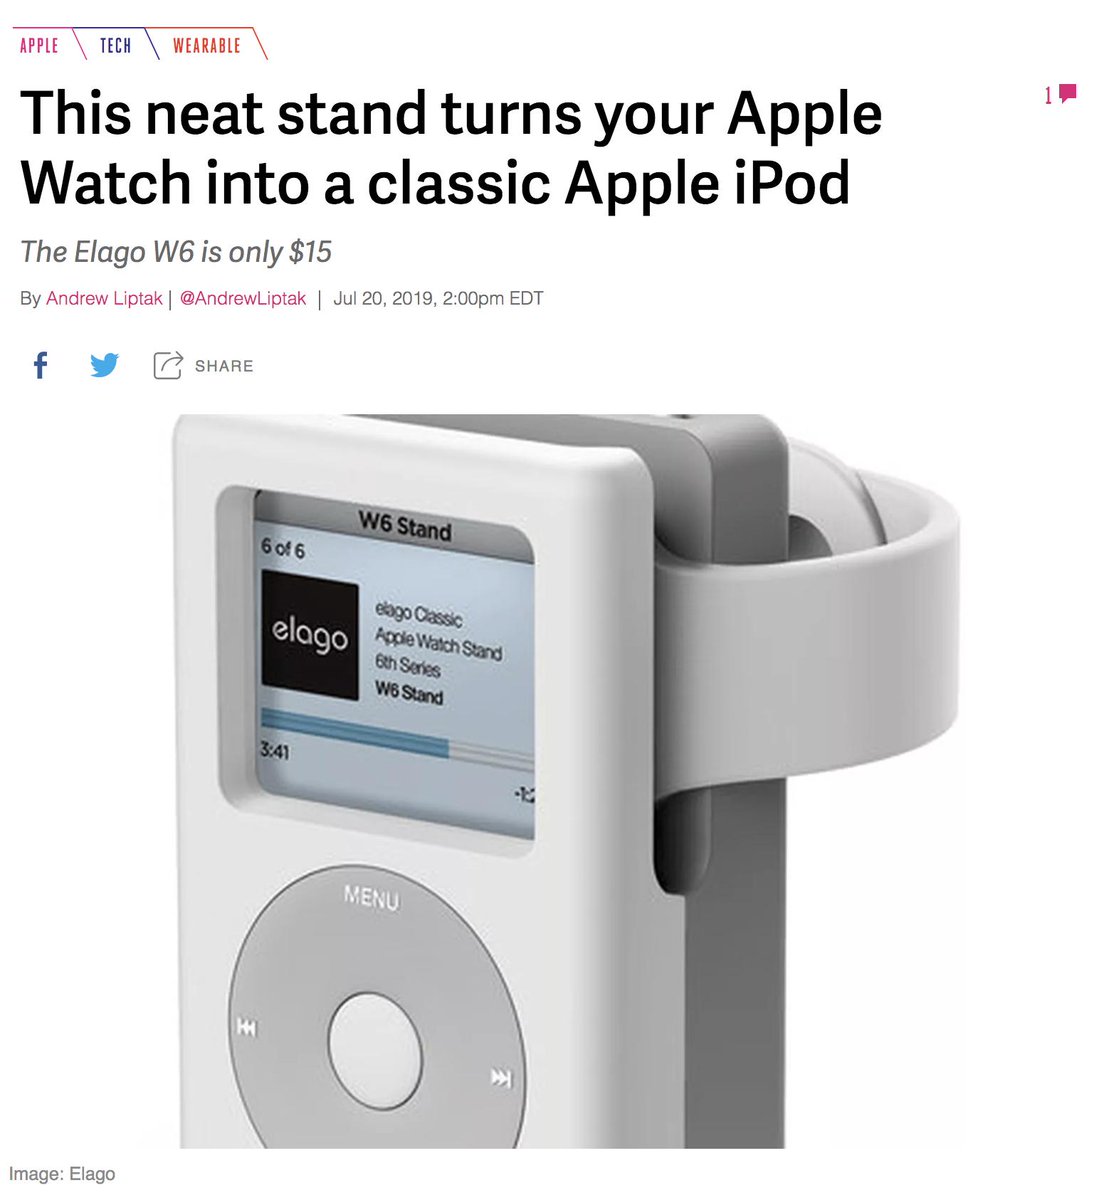  #delightful_design_details 14Products can be delightful but not great at what they do. This Apple Watch charger isn't easy to use compared to others but could be adored for nostalgia.Novelty can be delightful and that *can* be what makes it a great product - but not always.